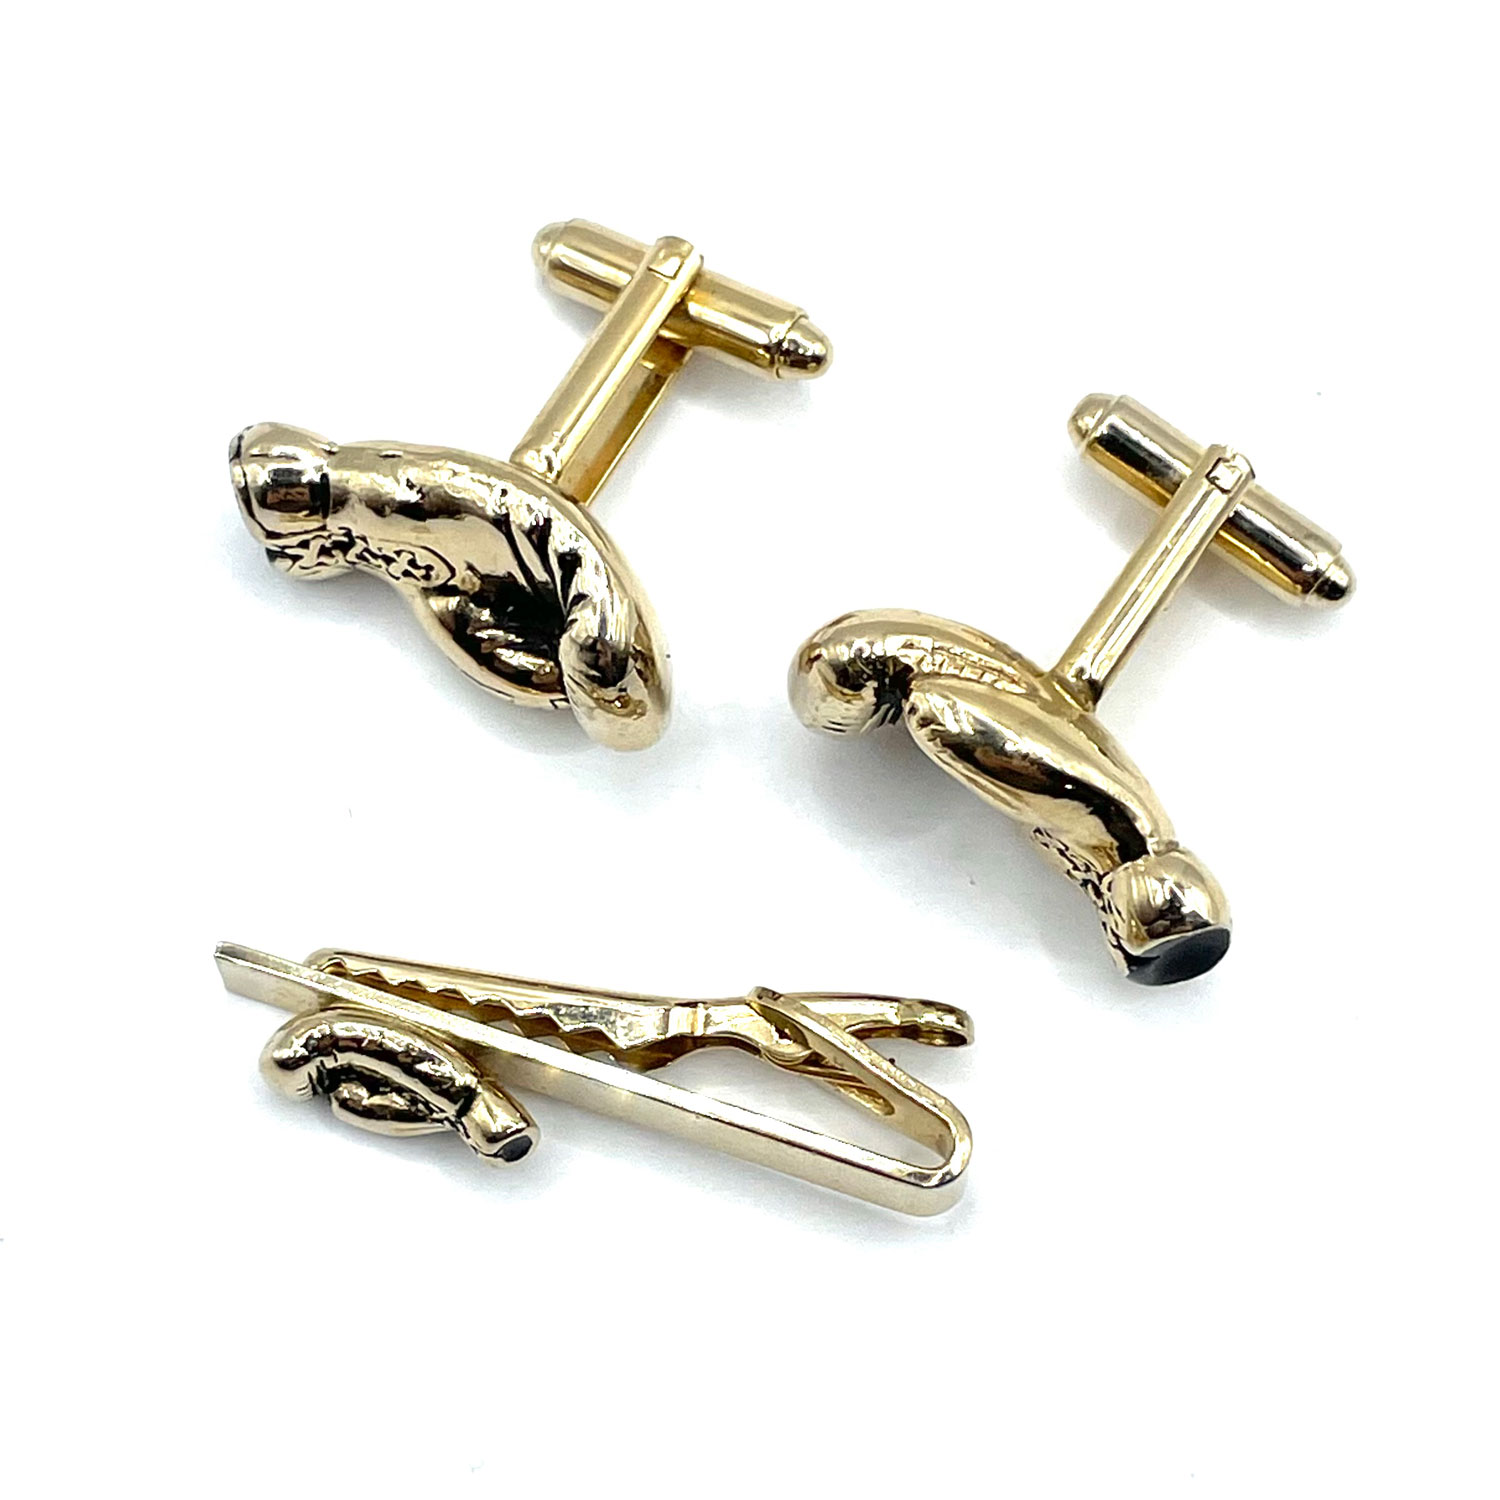 Vintage boxing glove cufflinks and tie clip set